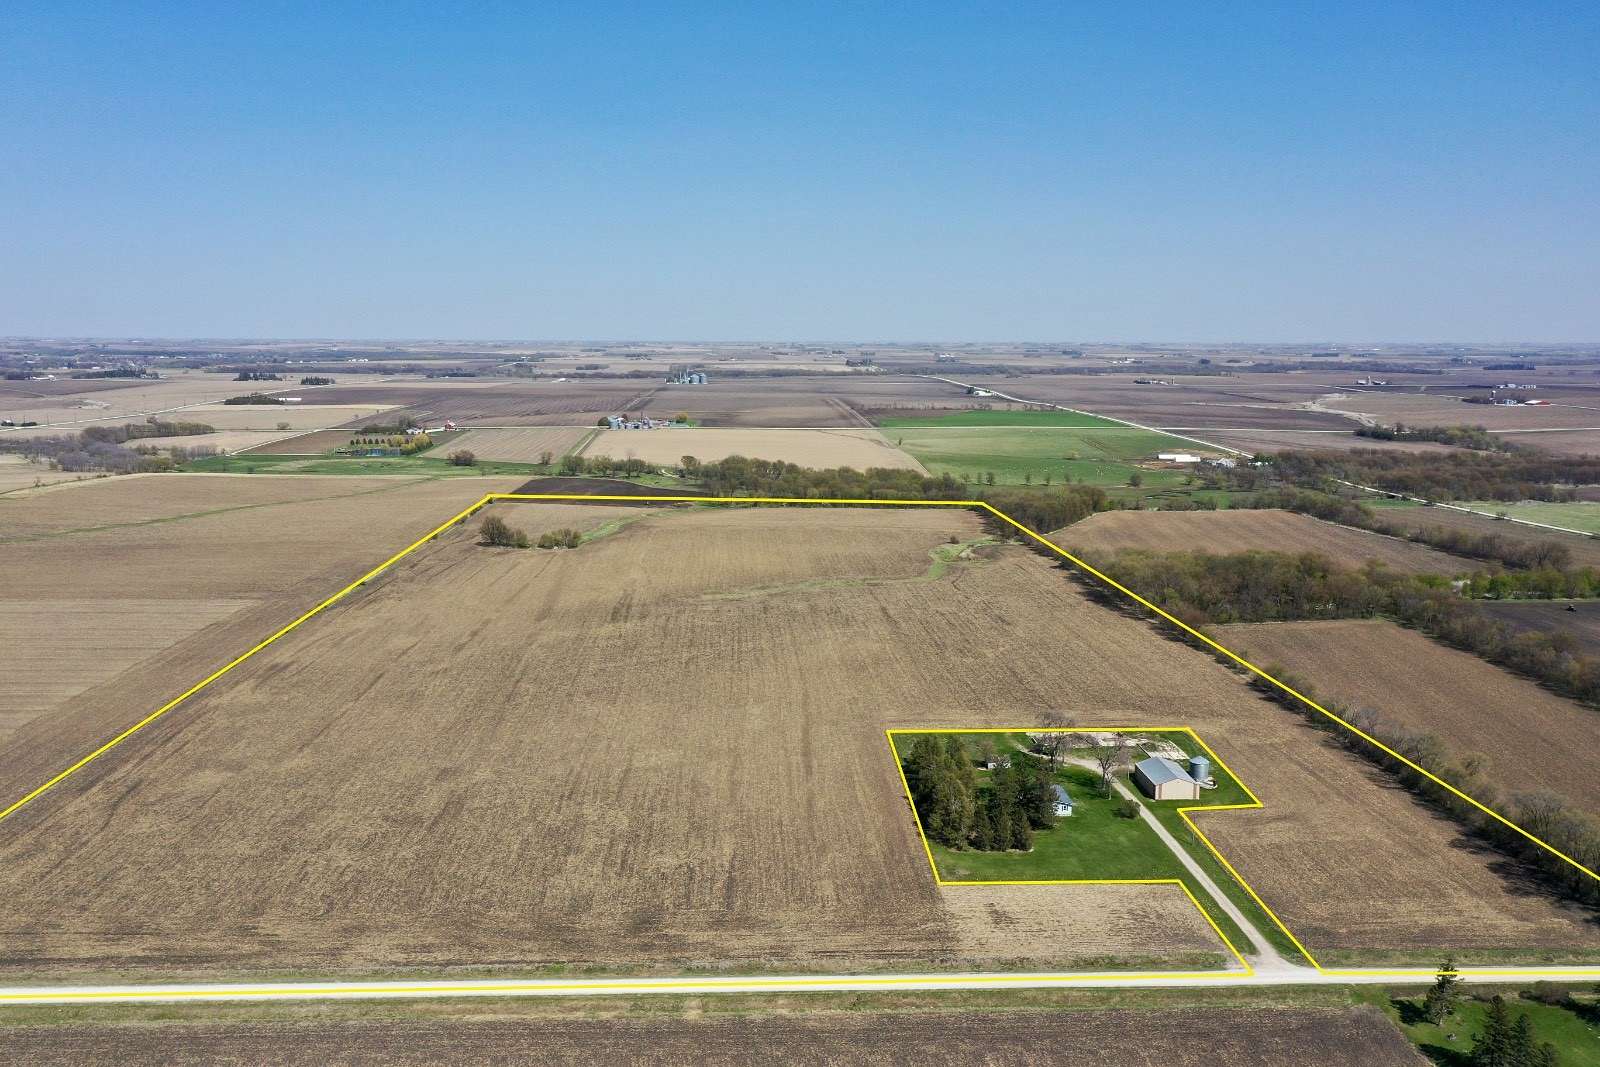 76.4 Acres of Agricultural Land for Sale in Sumner, Iowa